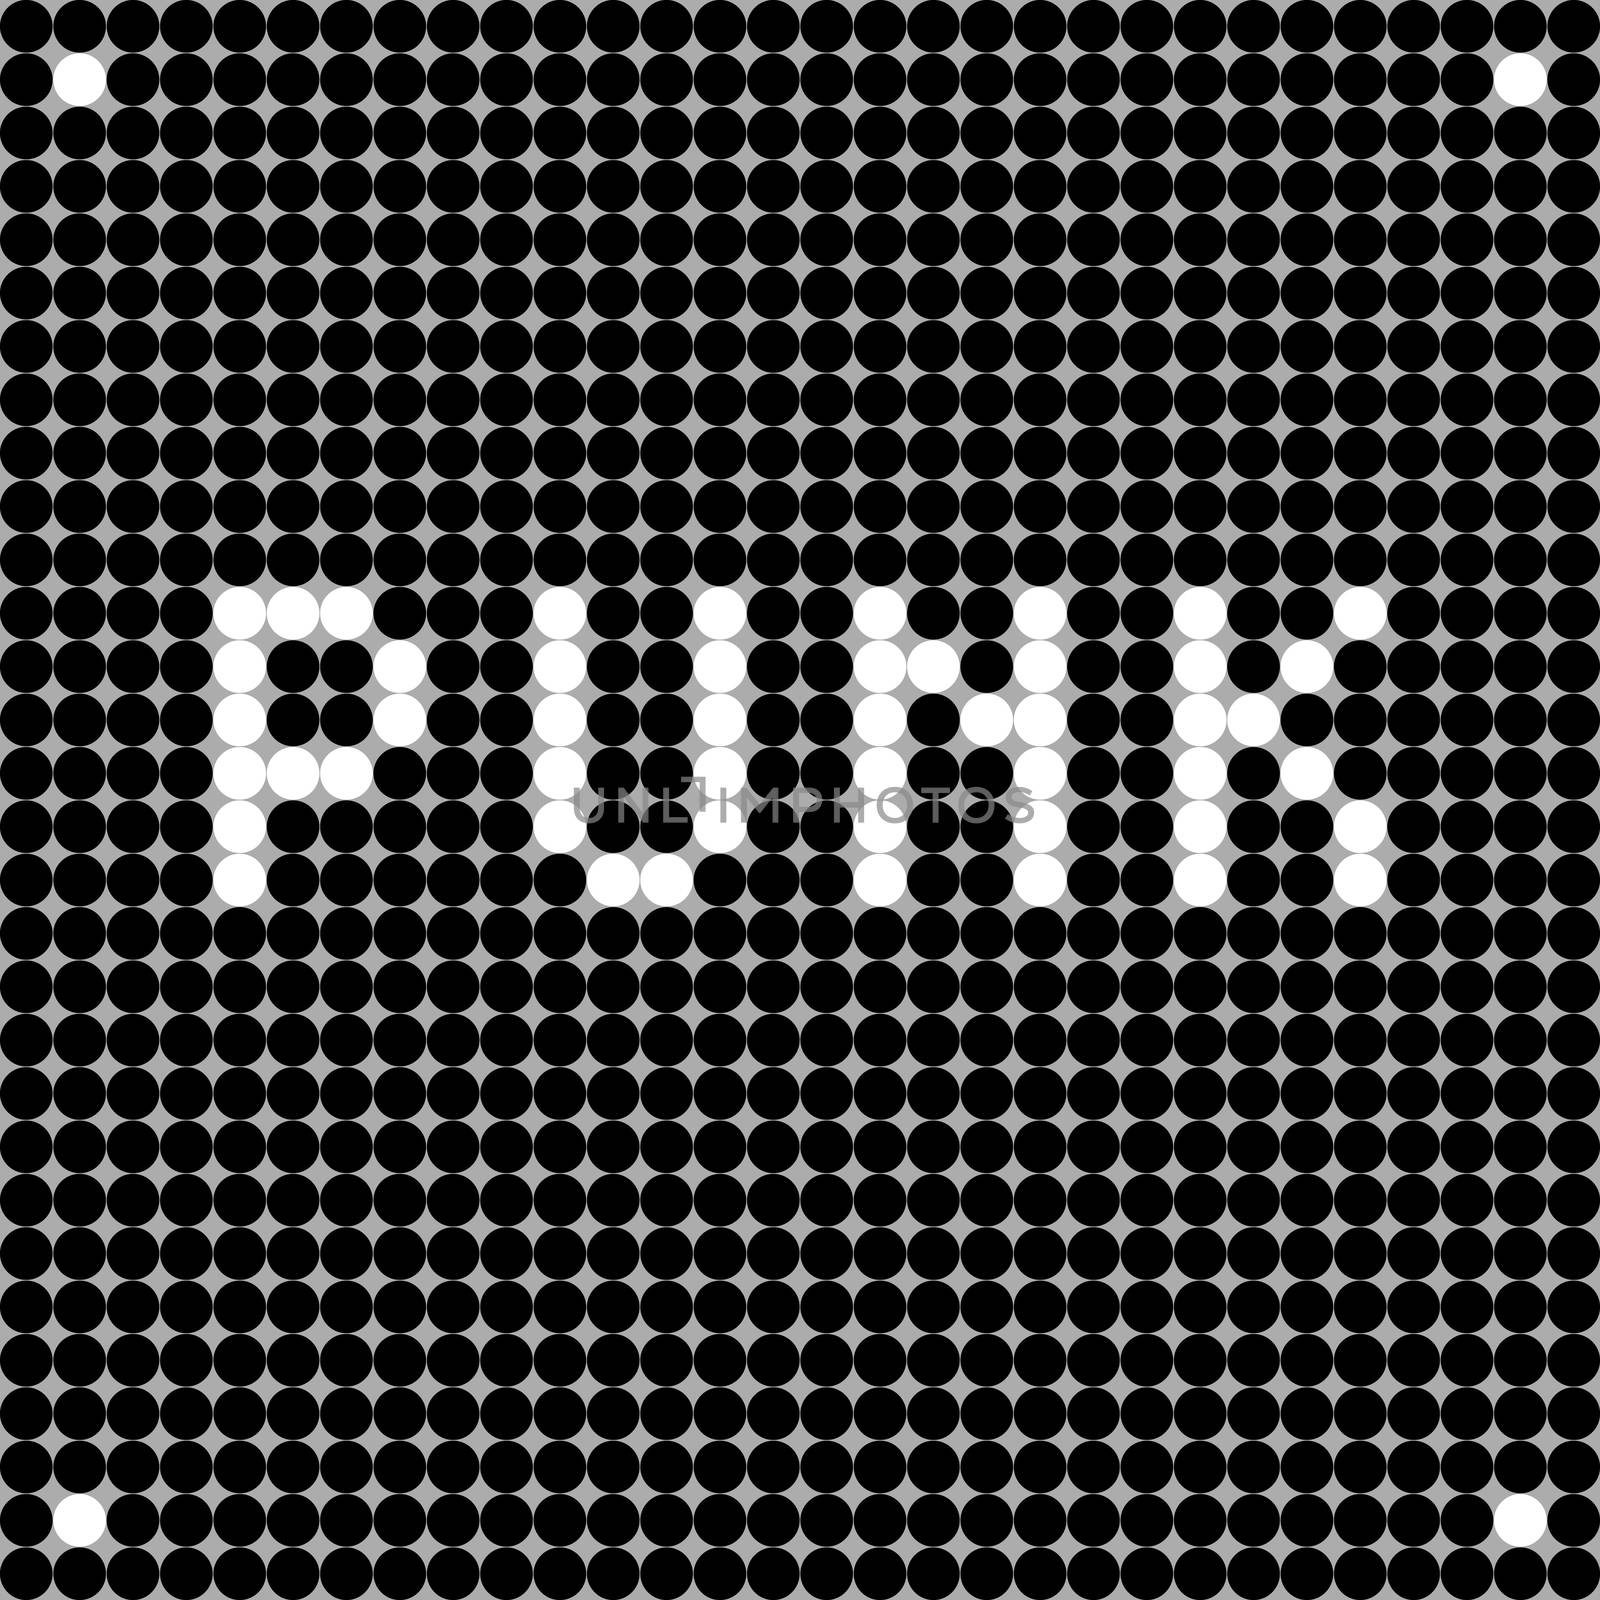 Punk music card, pixel illustration of a scoreboard composition with digital text made of dots